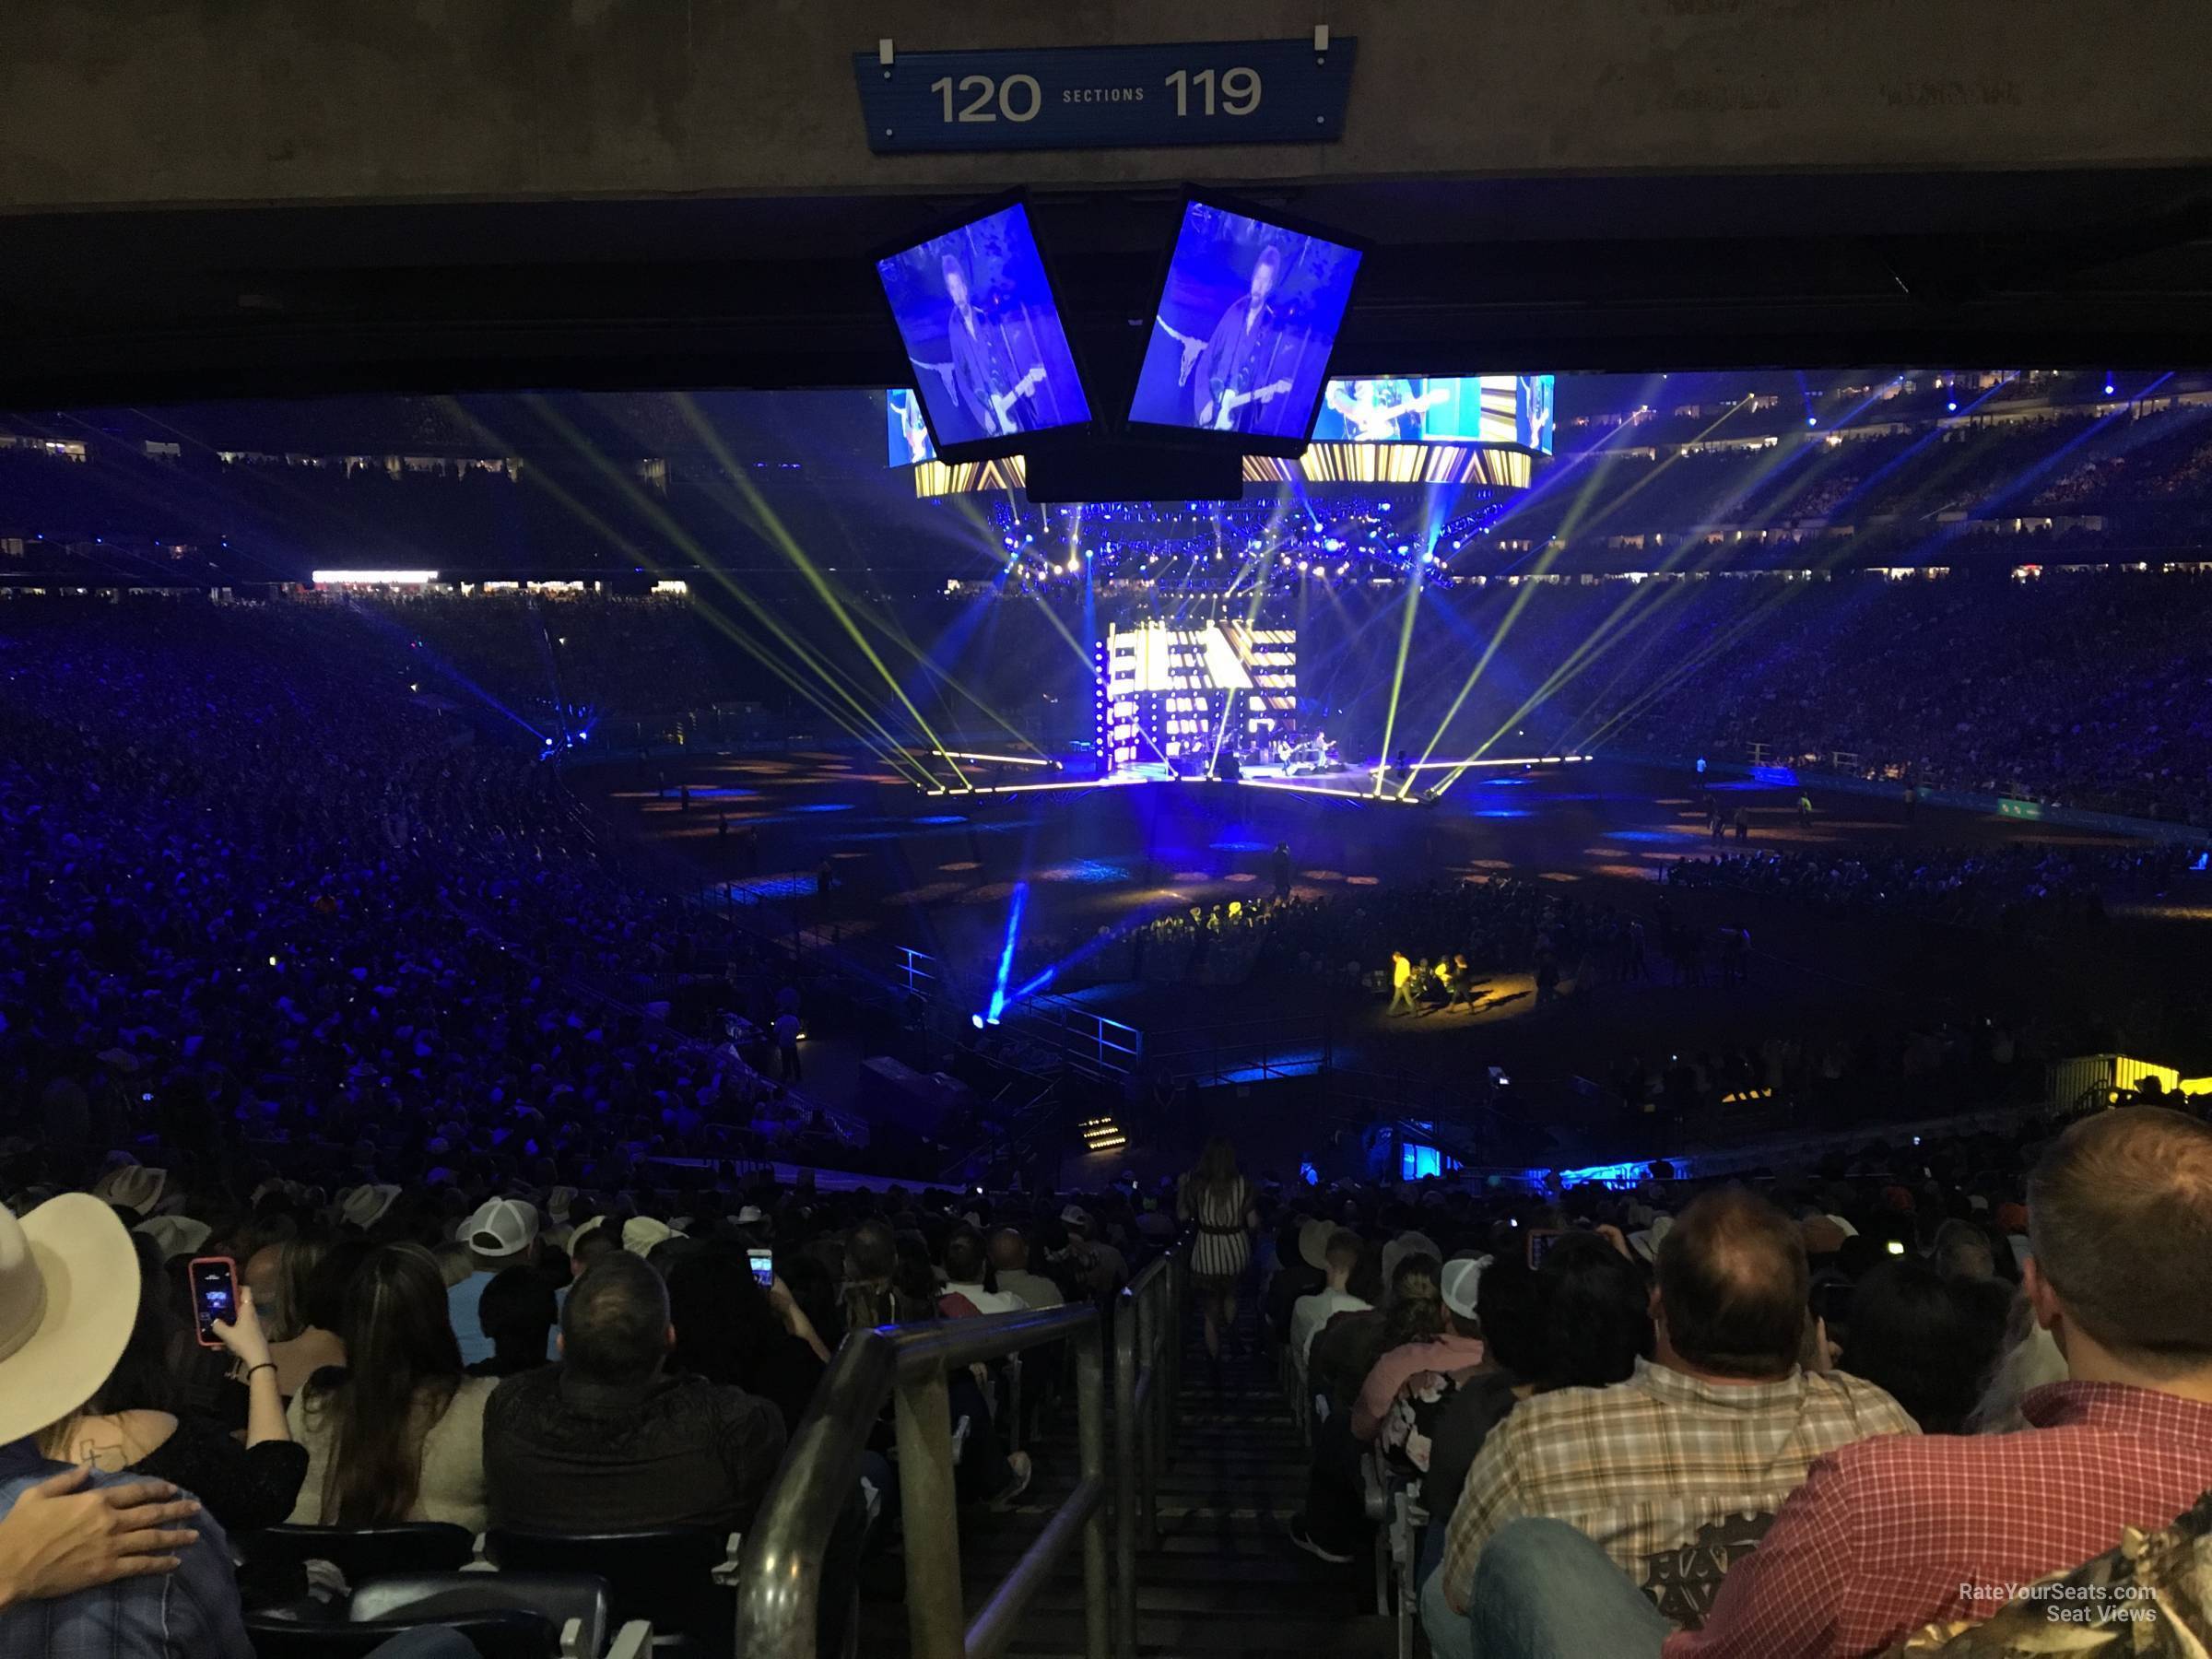 section 120, row hh seat view  for concert - nrg stadium